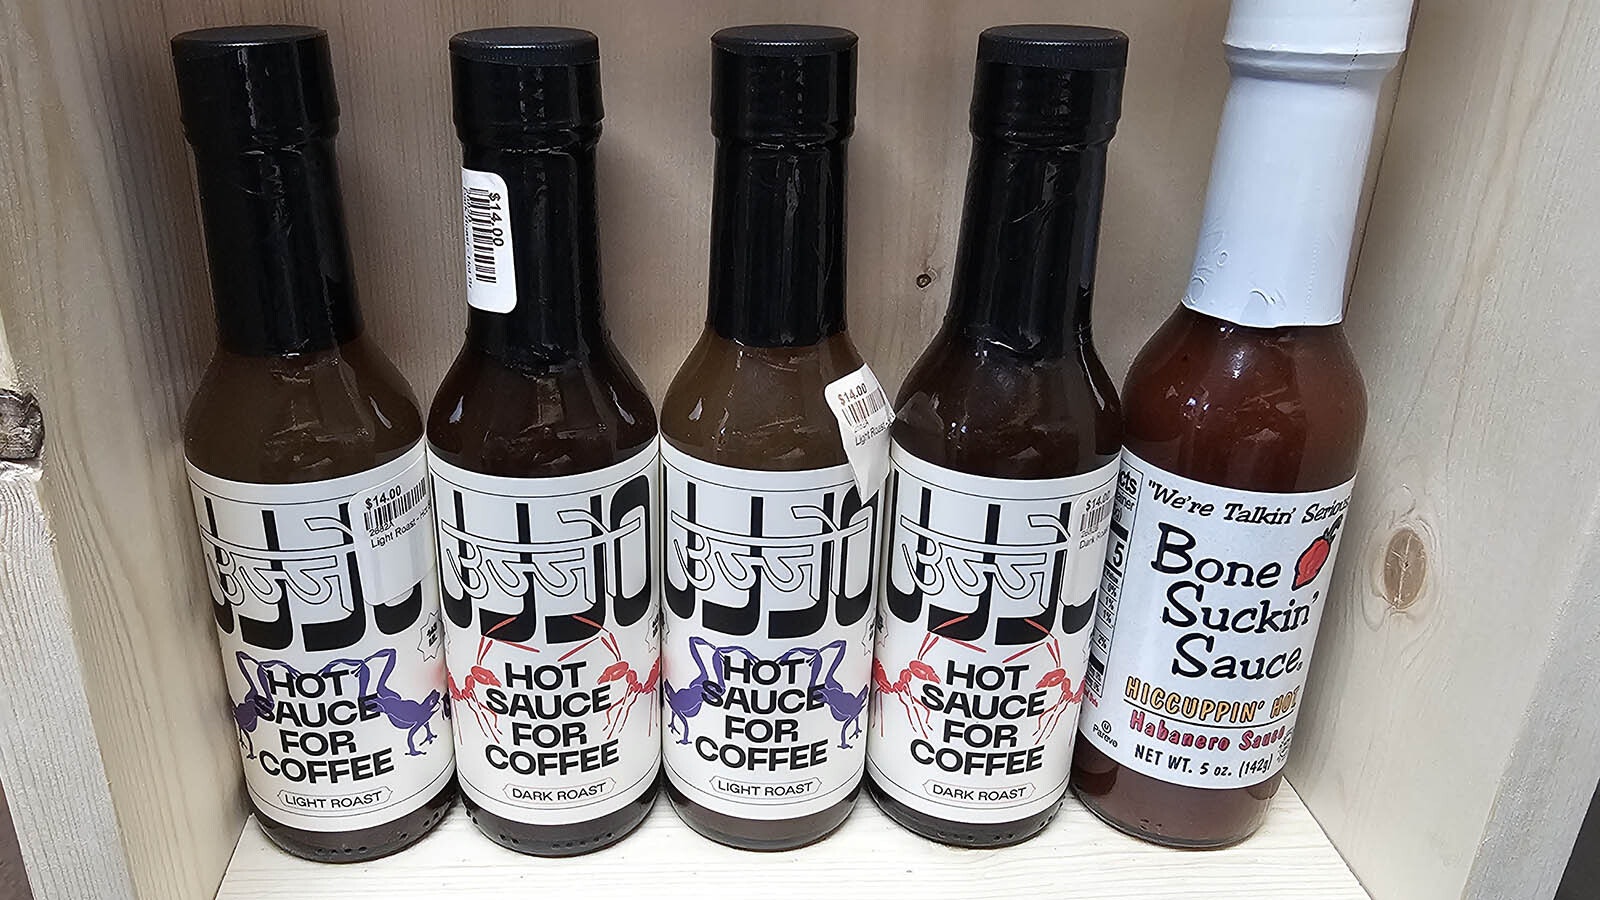 There's even a selection of hot sauces for coffee, believe it or not.